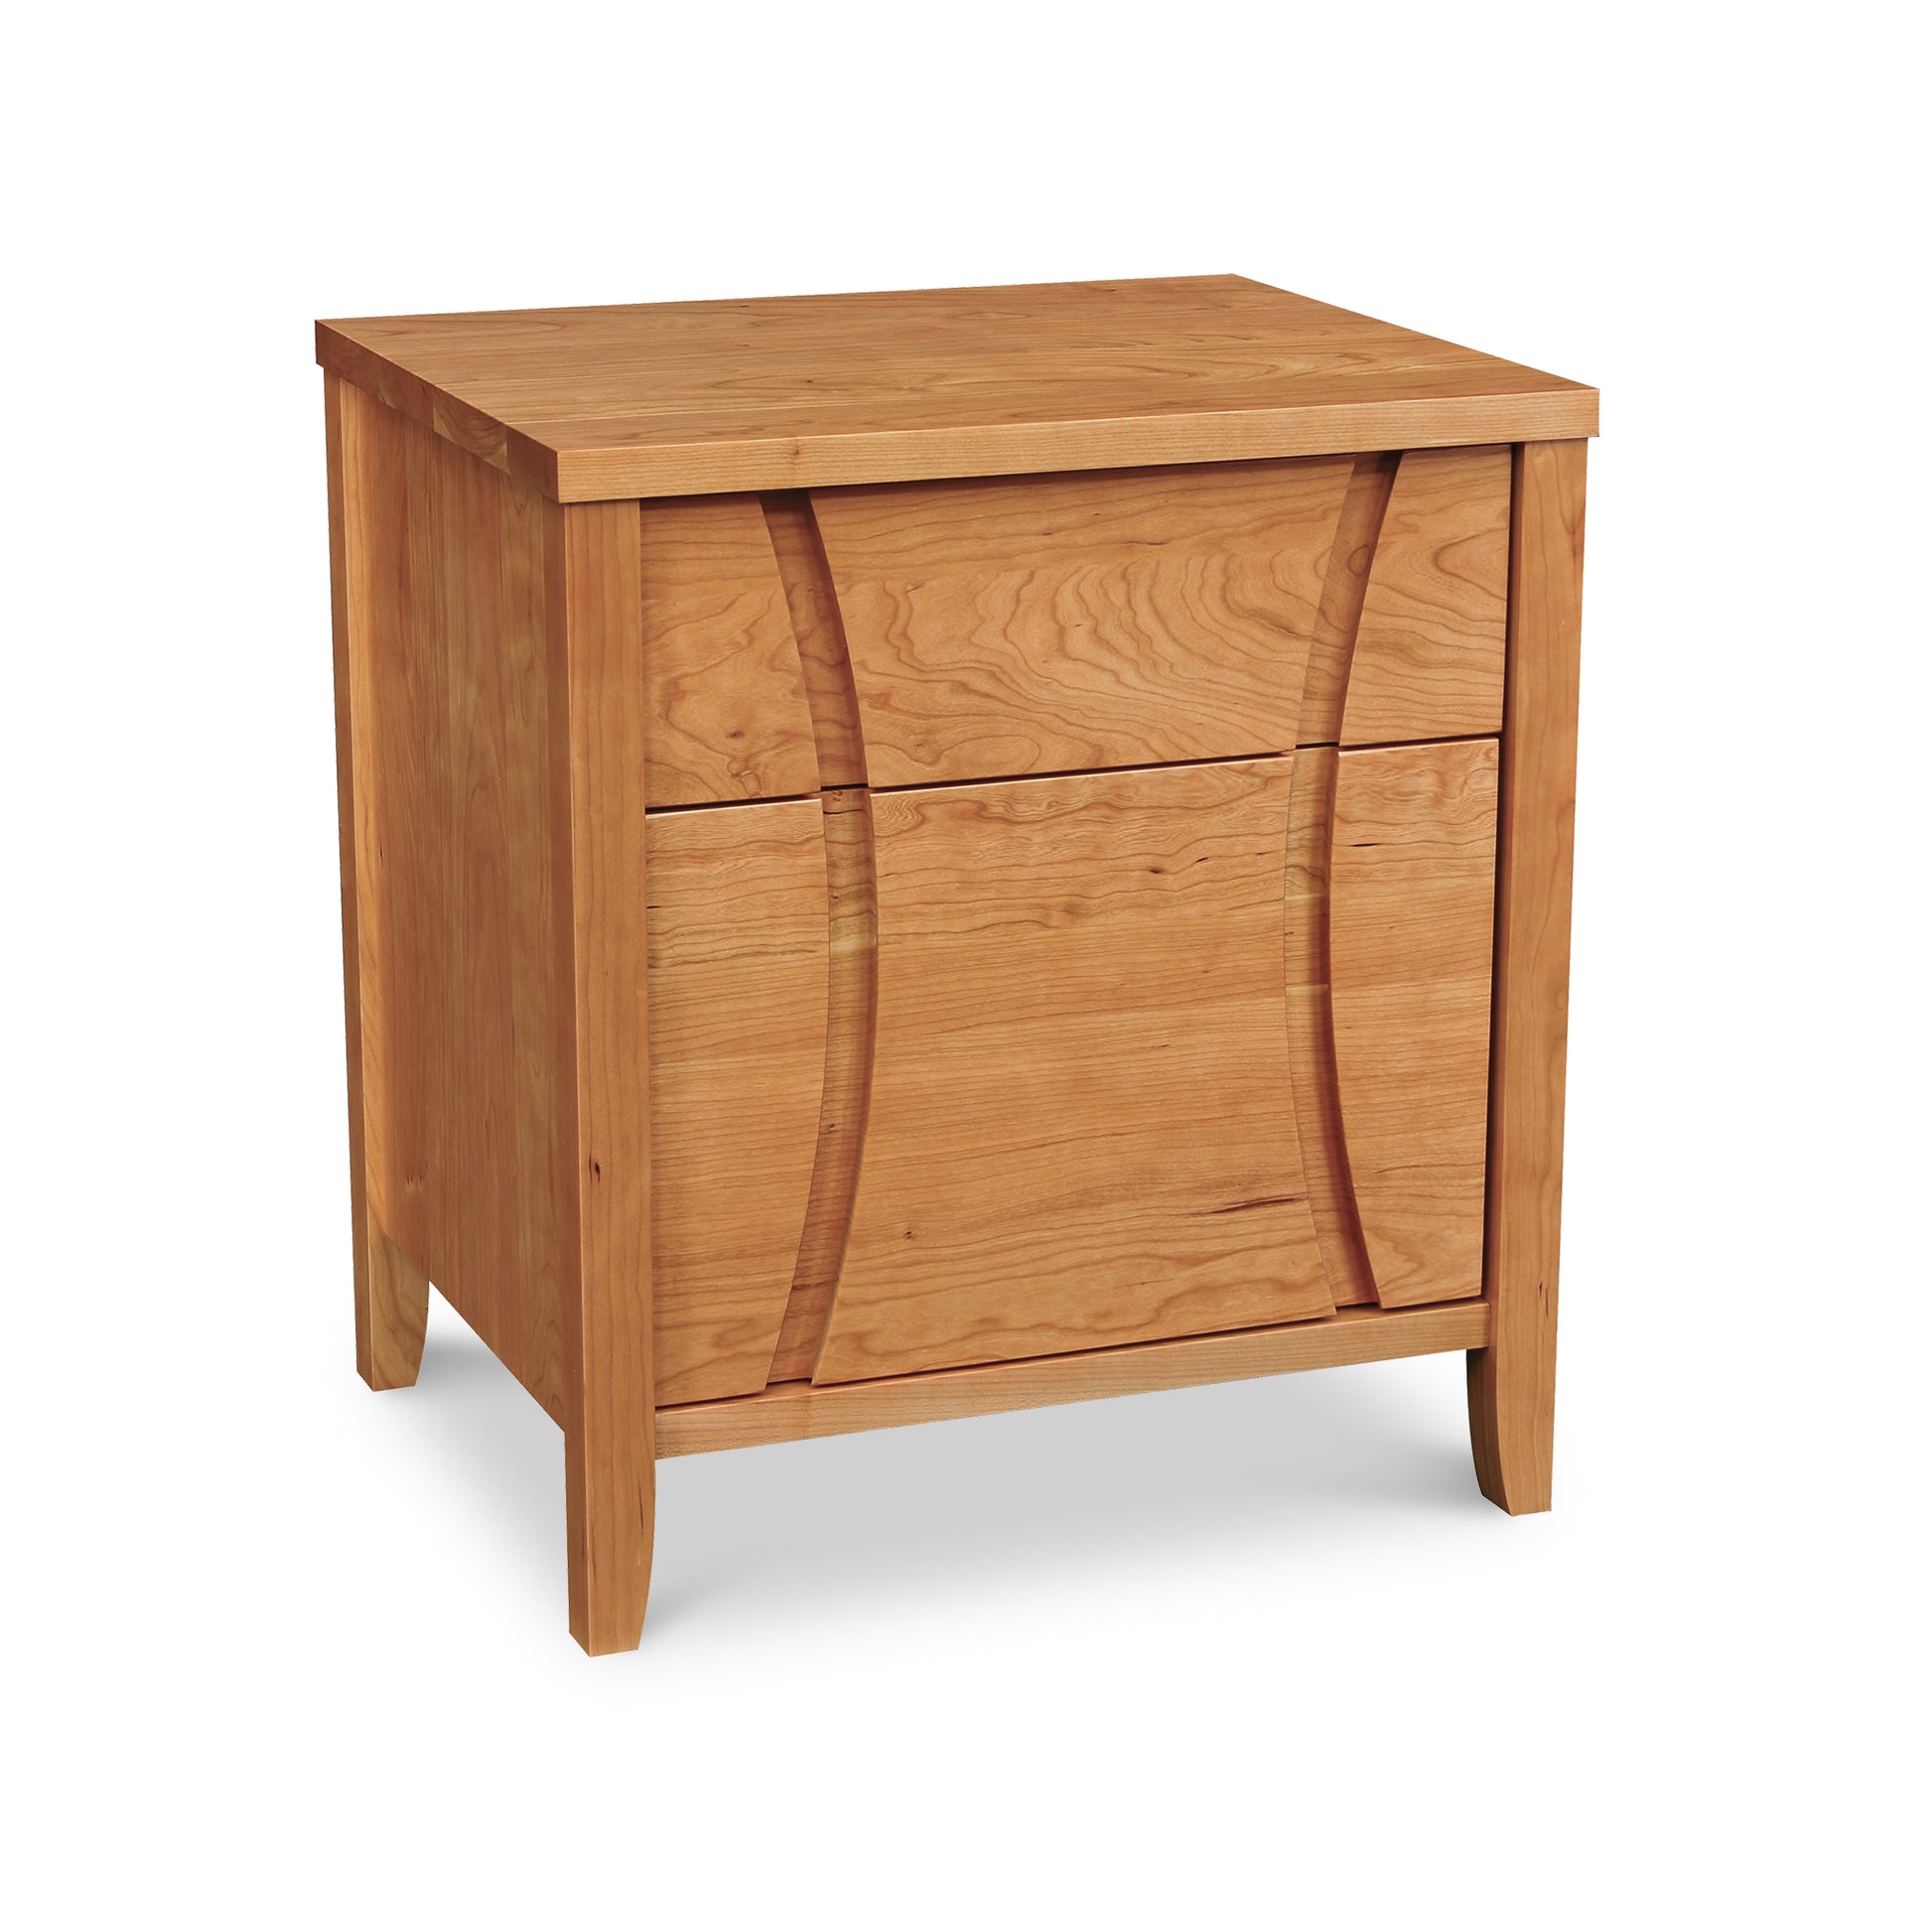 A Lyndon Furniture Holland 1-Drawer Nightstand with Door, designed with cherry wood.